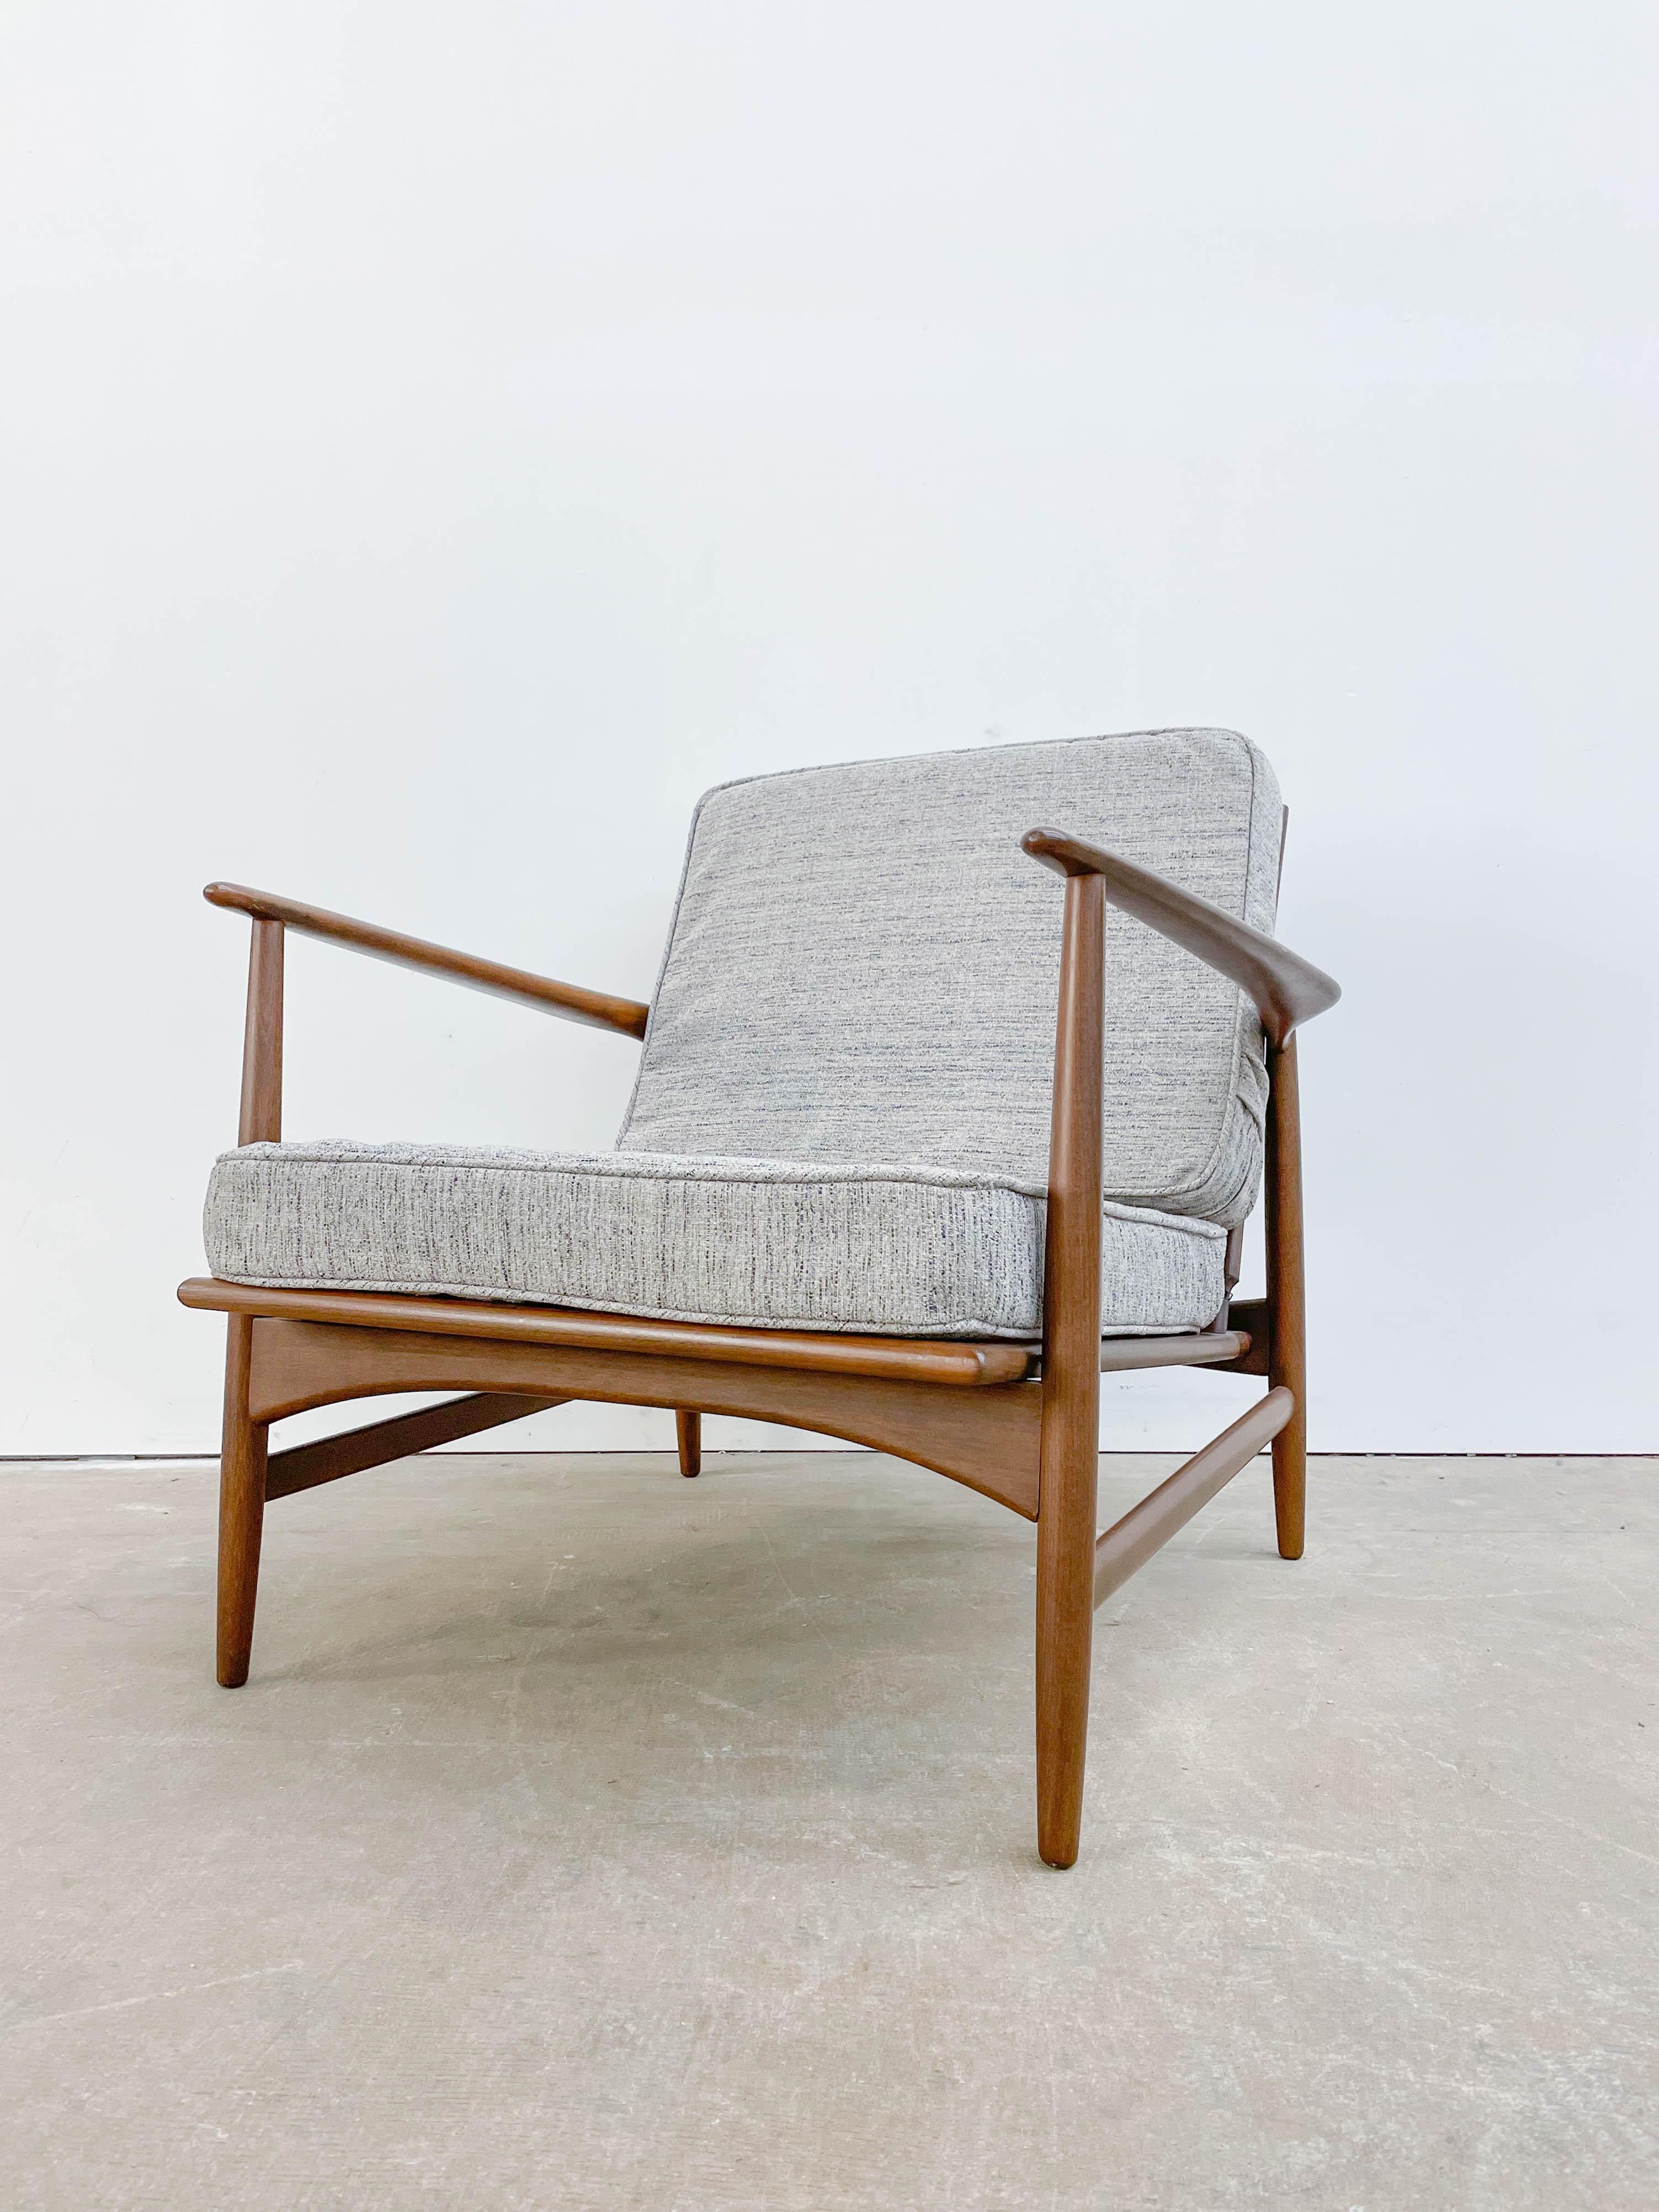 This attractive Danish Modern lounge chair was designed by Ib Kofod Larsen for Selig in the 1960s. It boasts a sleek and ergonomic design that looks great from every angle. The lounge chair has a solid beech frame with walnut tone finish, which